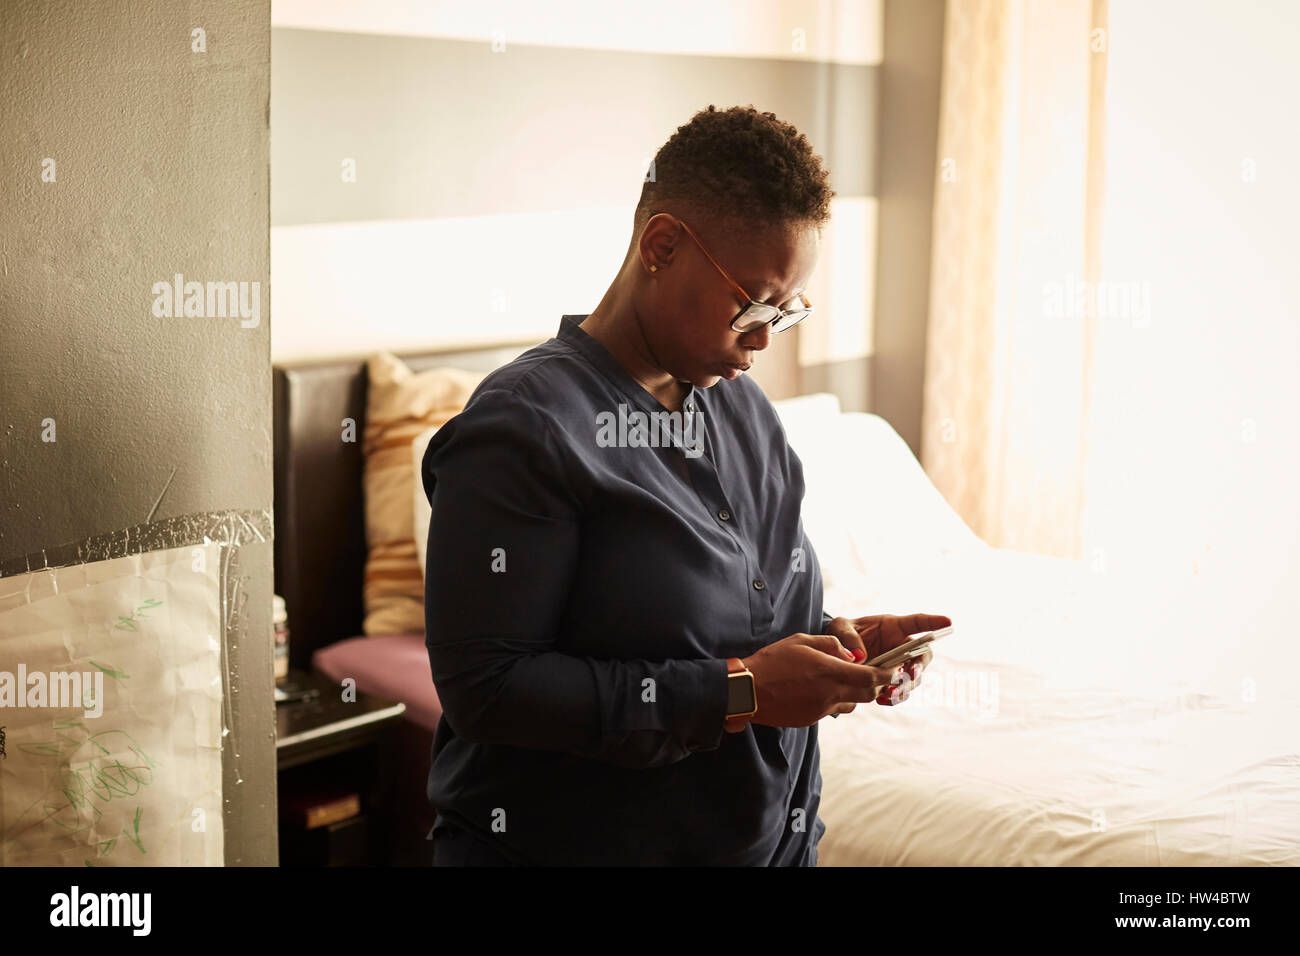 Black woman standing in bedroom texting on cell phone Stock Photo